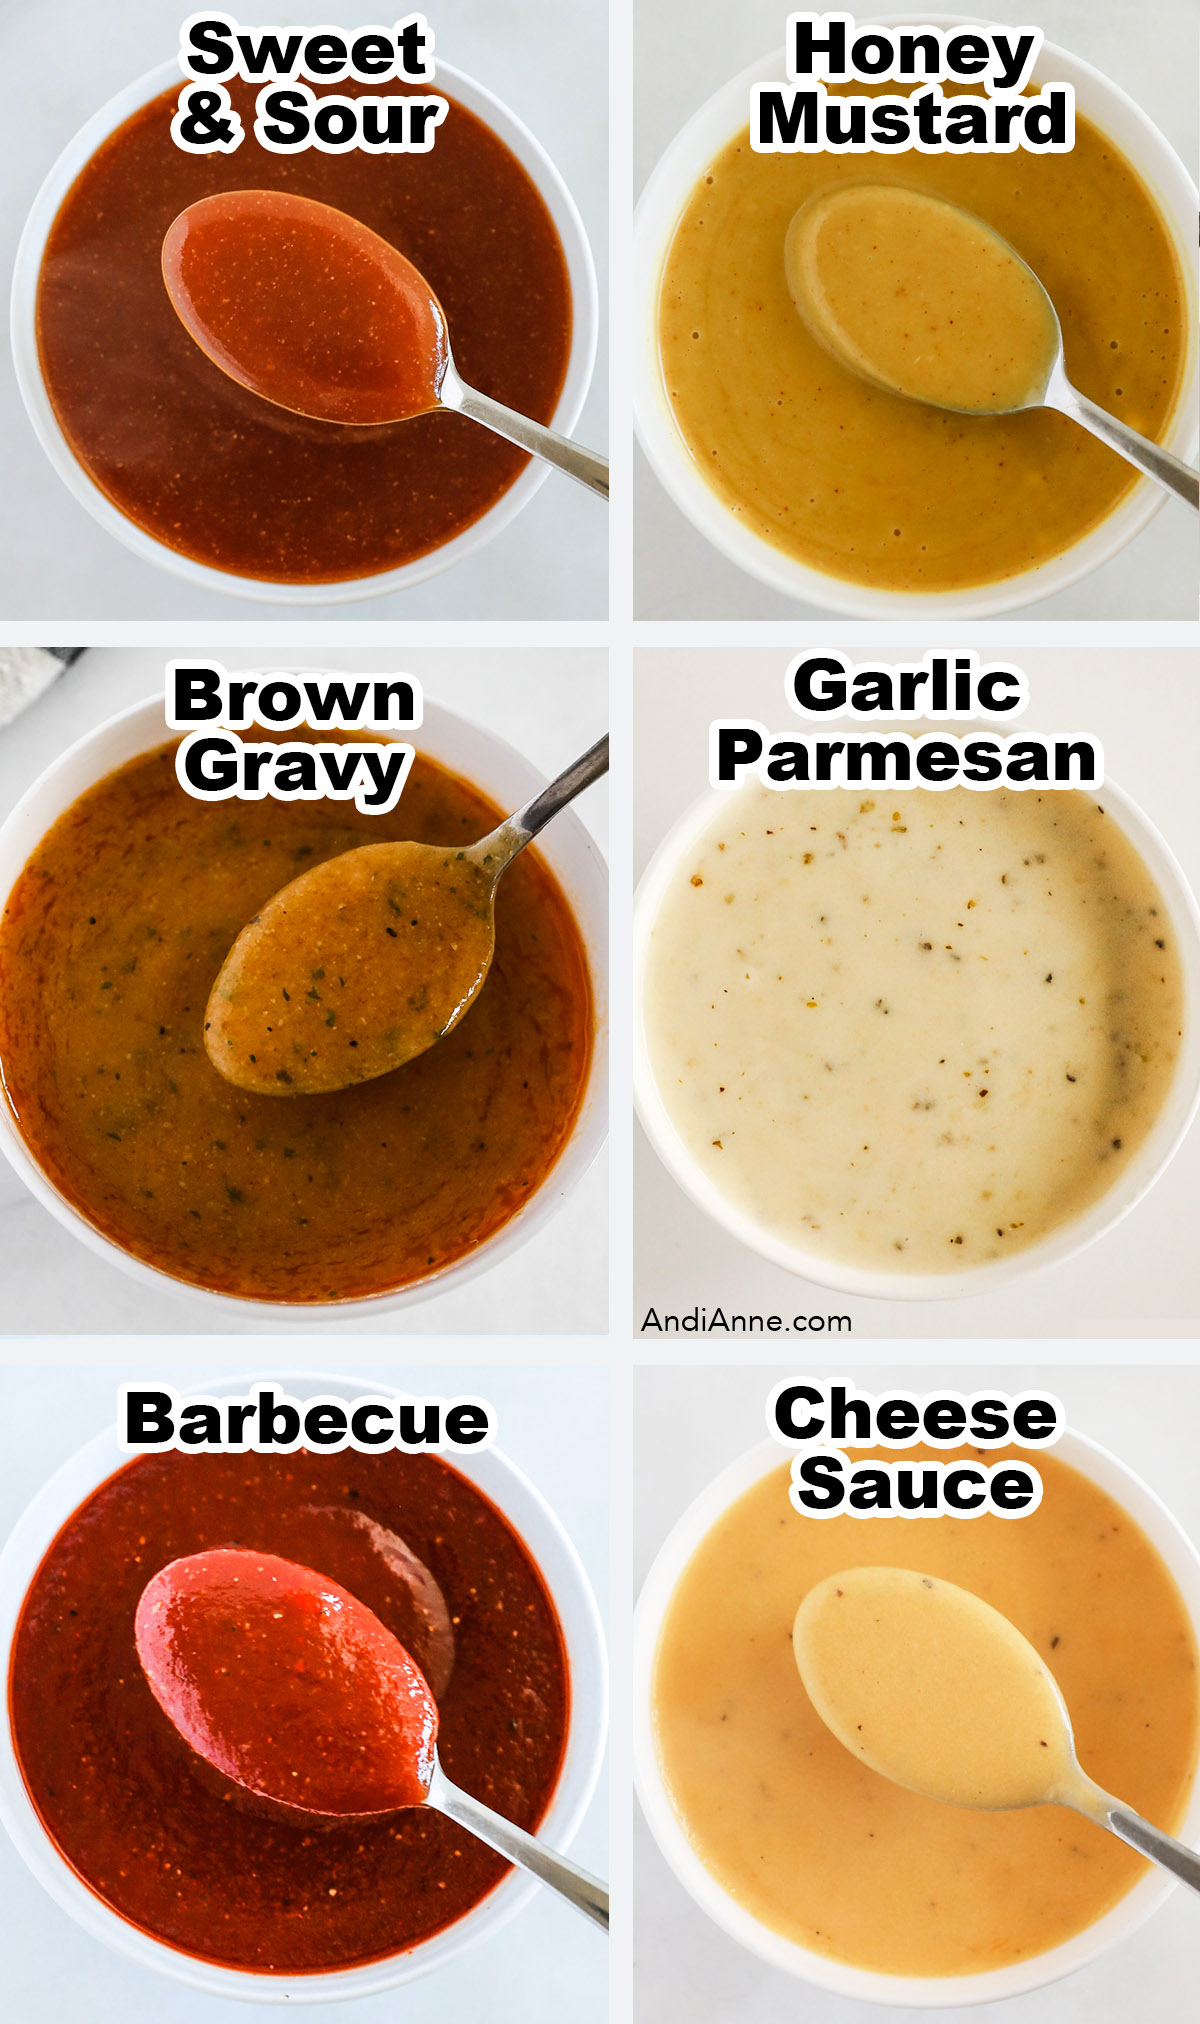 Six images of homemade sauces in bowls with spoon. Sauces include sweet and sour, honey mustard, brown gravy, garlic parmesan, barbecue and cheese sauce.